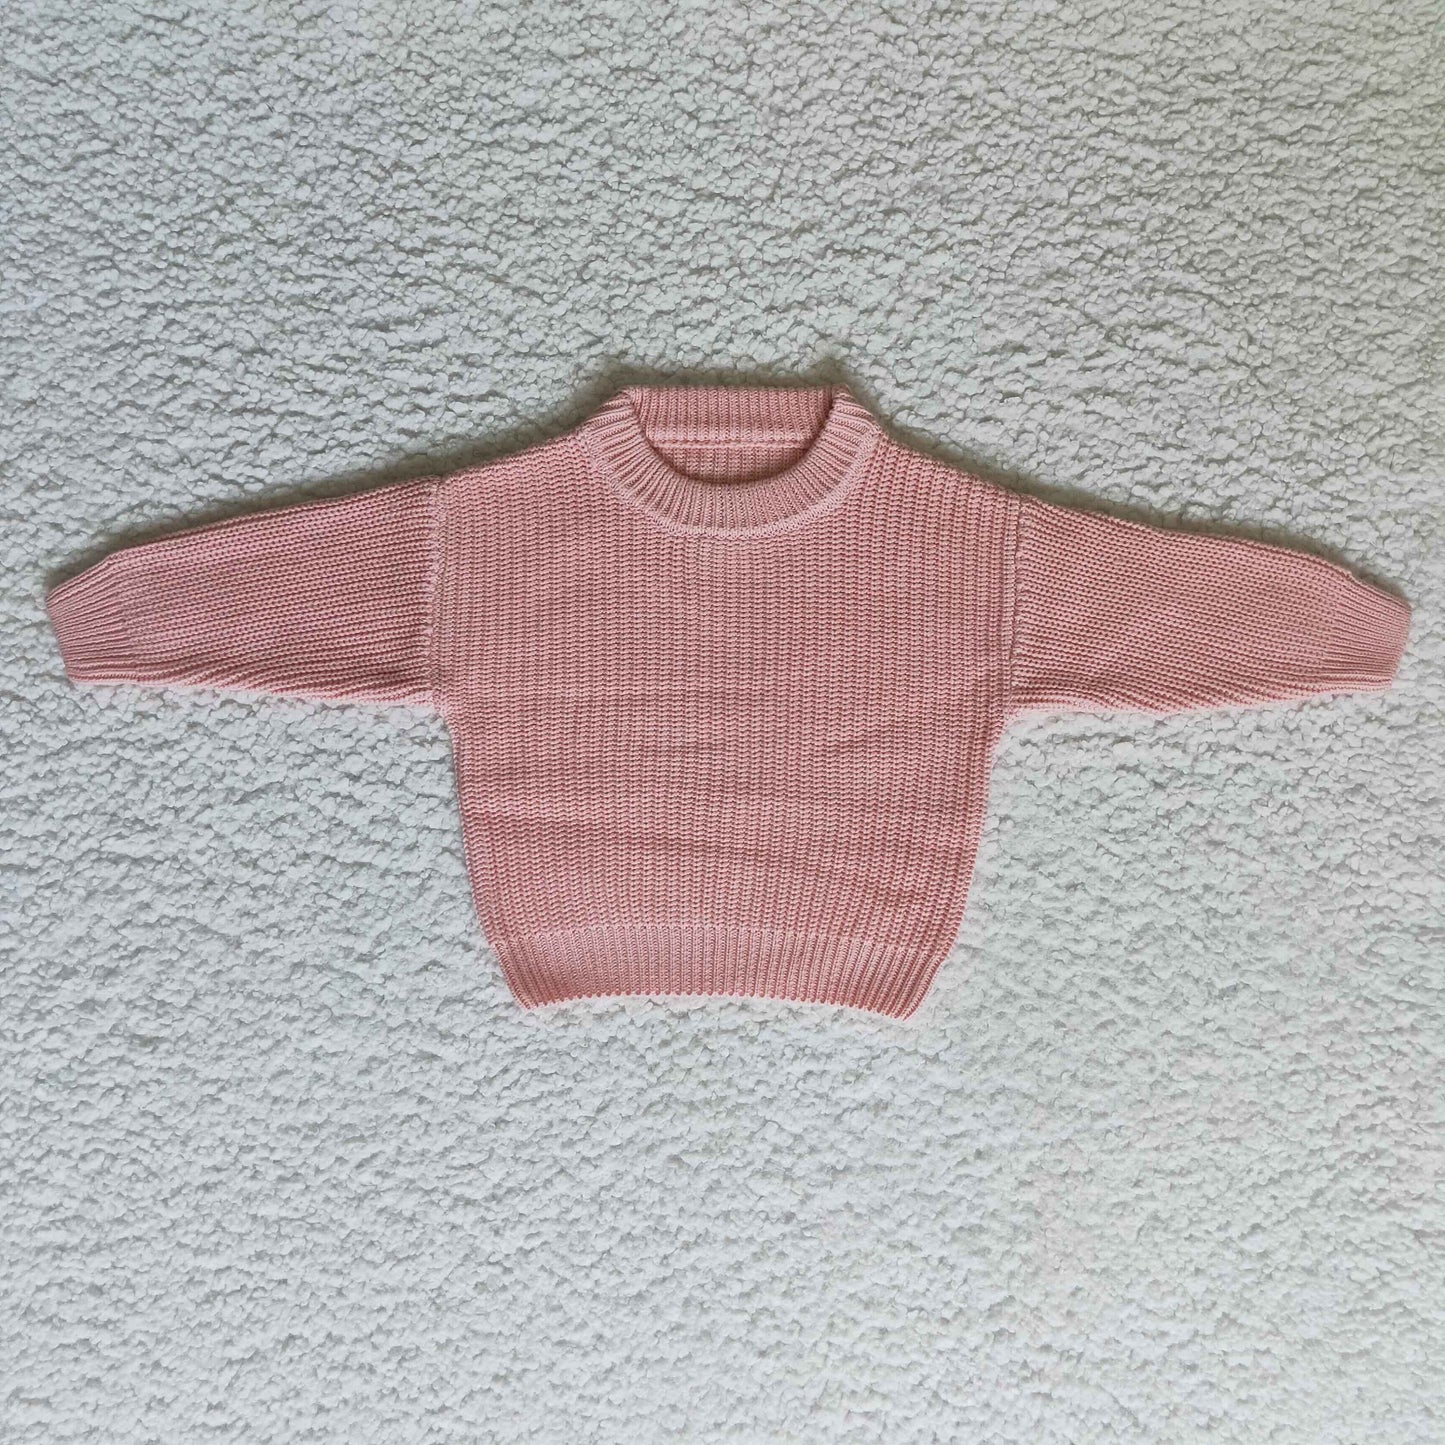 GT0032 Children's red knitted sweater